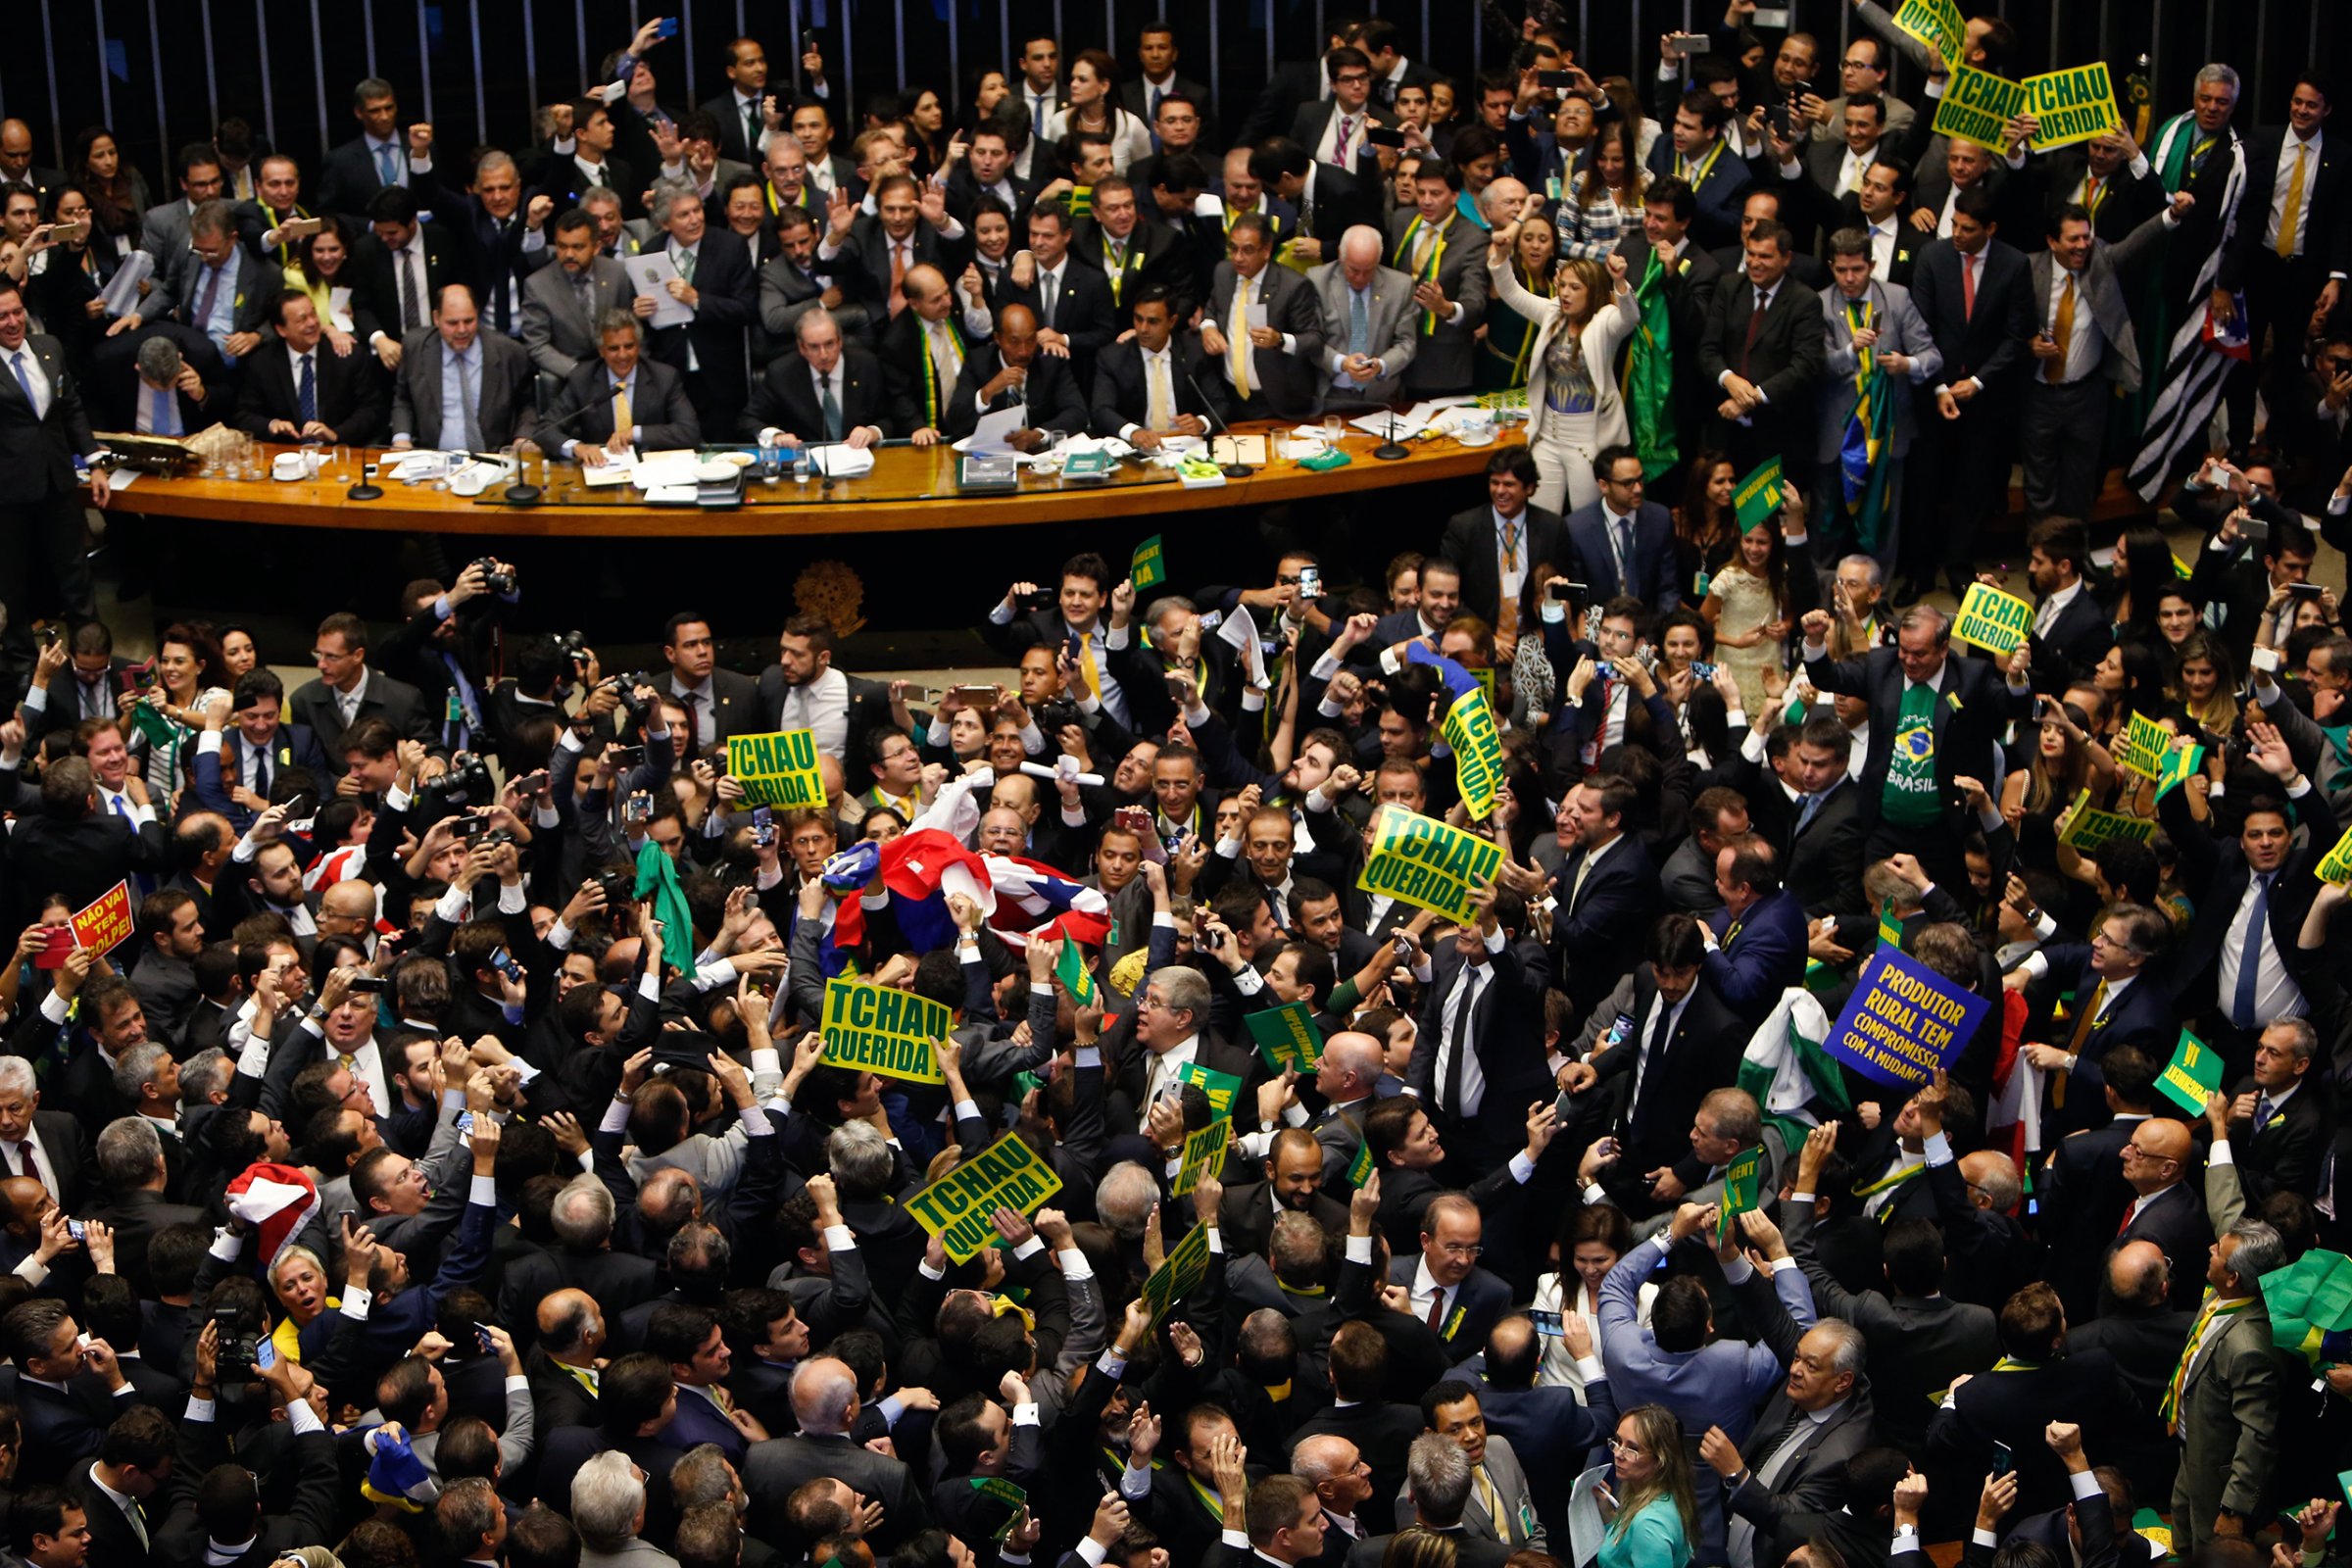 Deputies of the Lower House of Congress vote on whether to impeach President Dilma Rousseff in Brasilia, Brazil, April 17, 2016.